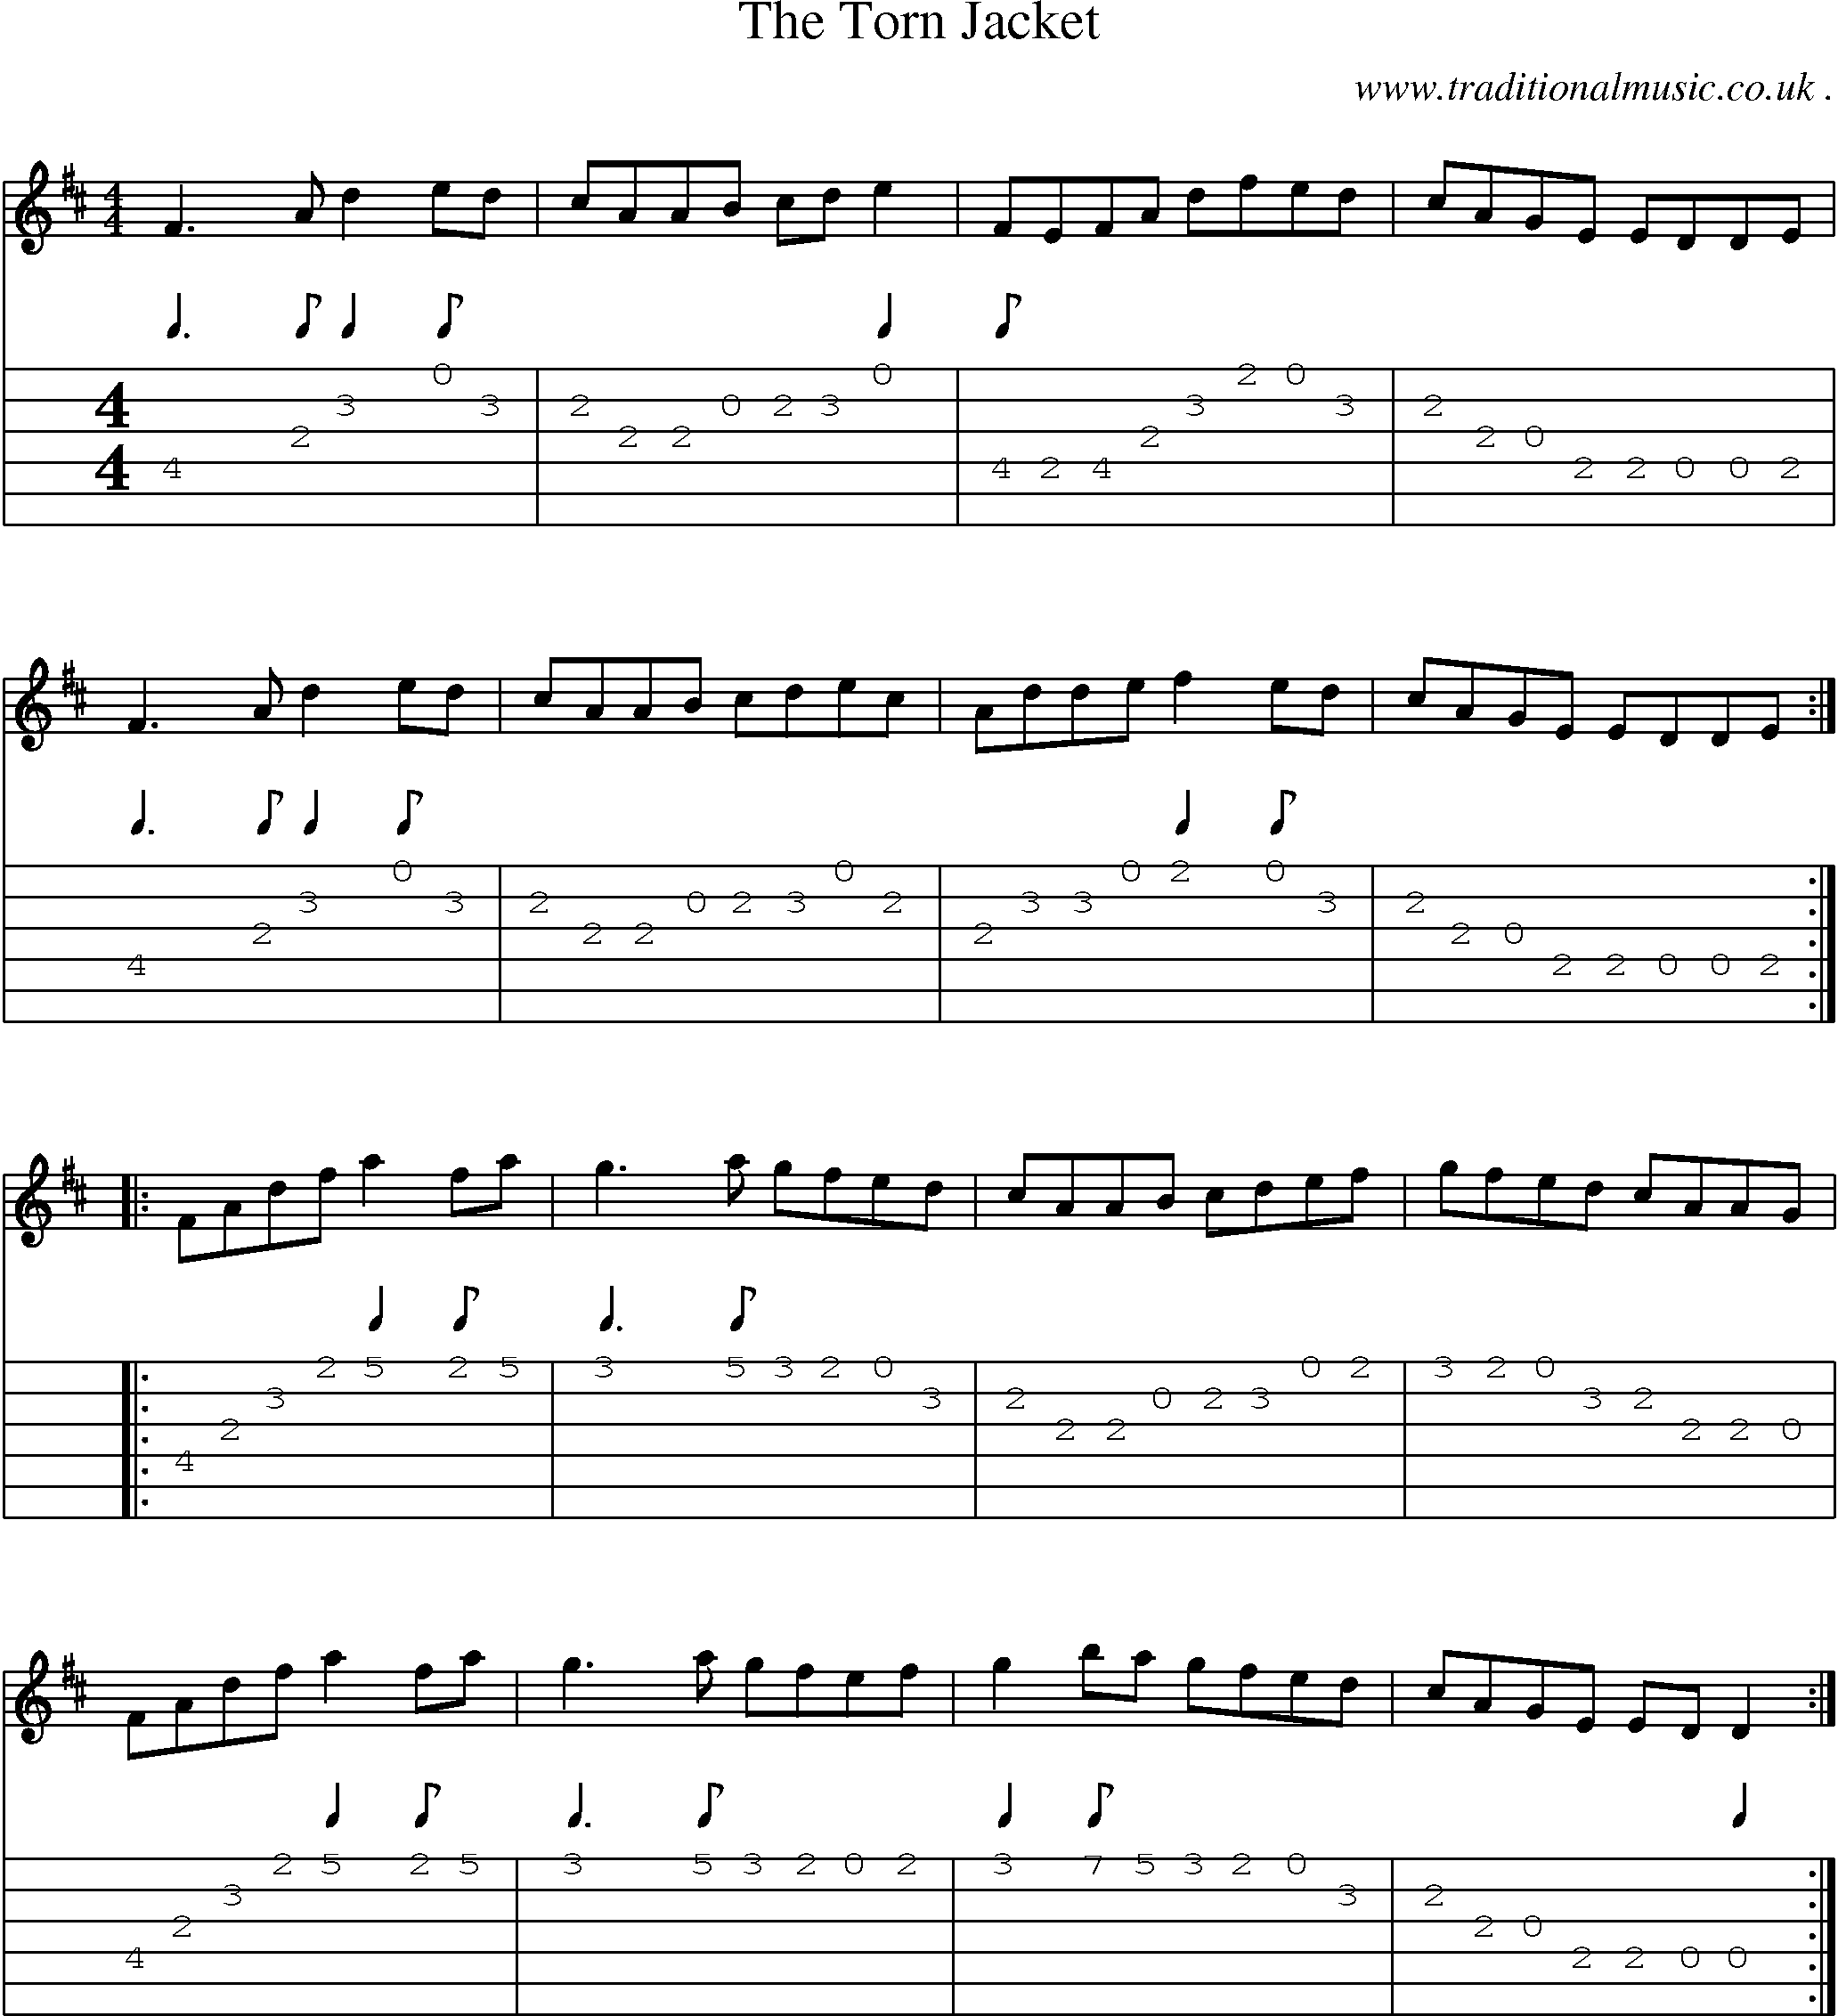 Sheet-Music and Guitar Tabs for The Torn Jacket